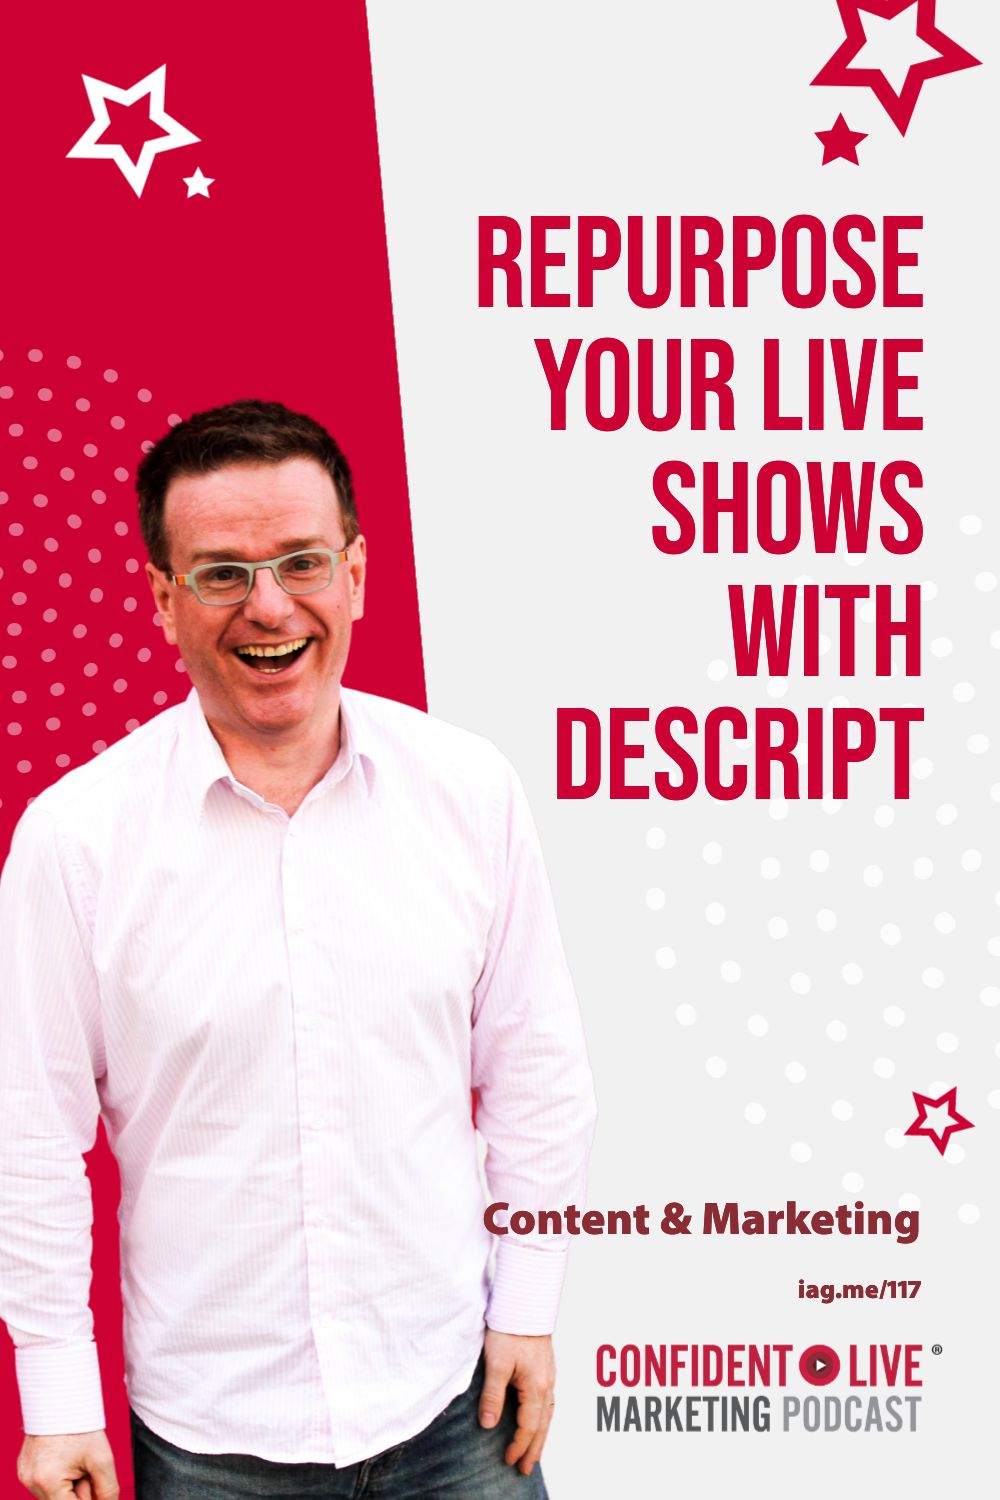 Turn Your Live Shows into a Repurposing Powerhouse with Descript